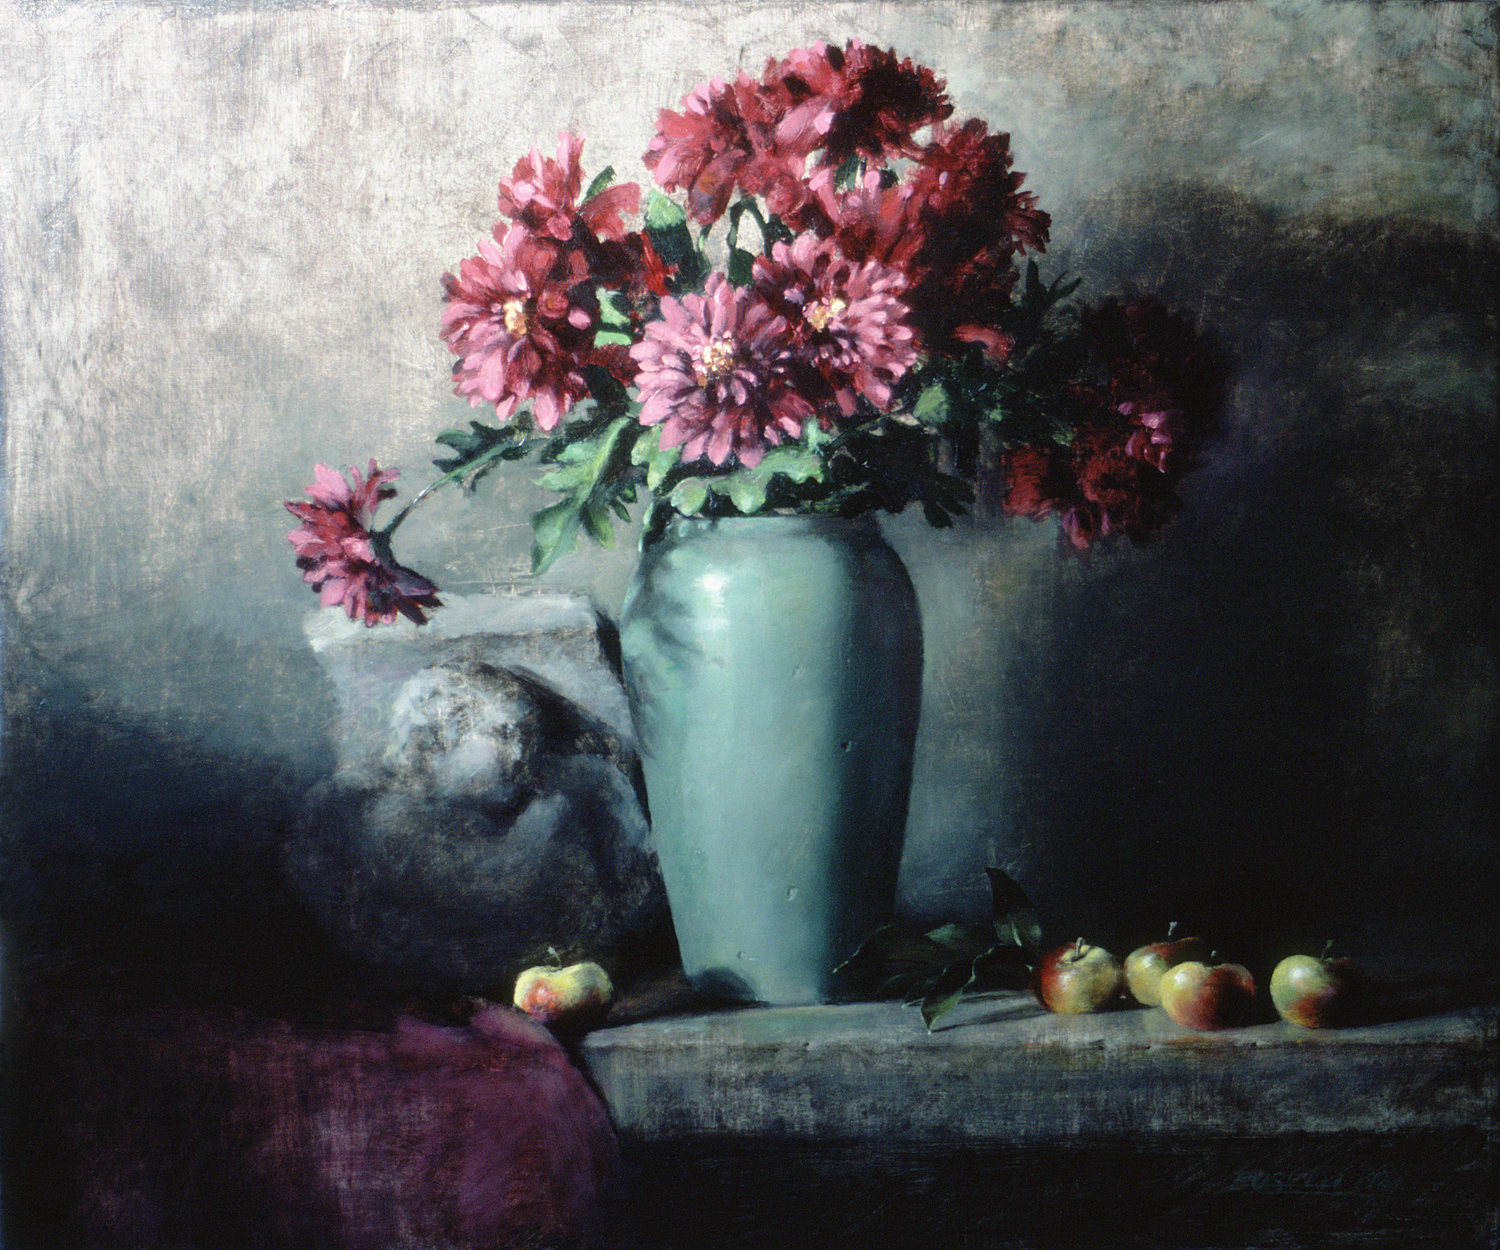  THE JADE VASE  ALLIED ARTISTS OF AMERICA NATIONAL EXHIBITION , SALMAGUNDI CLUB  oil on canvas | 21" x 24" 